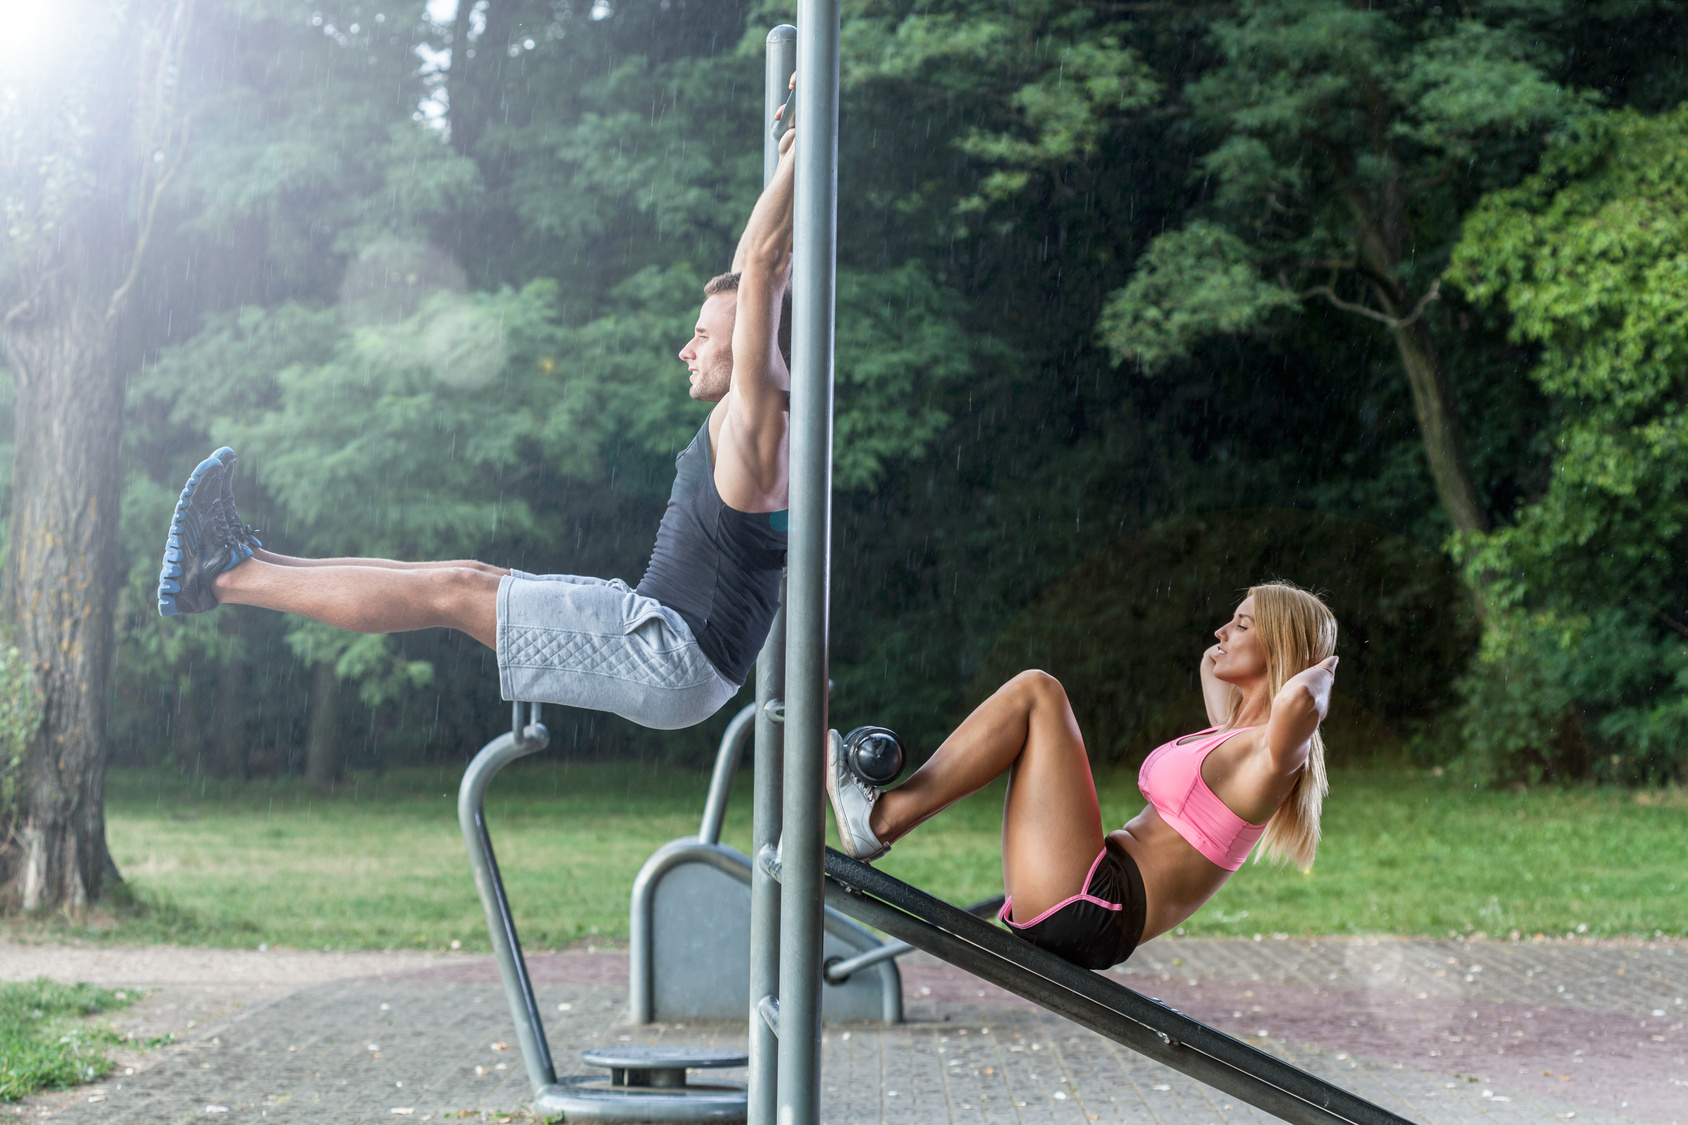 Couple working out on outdoor gym